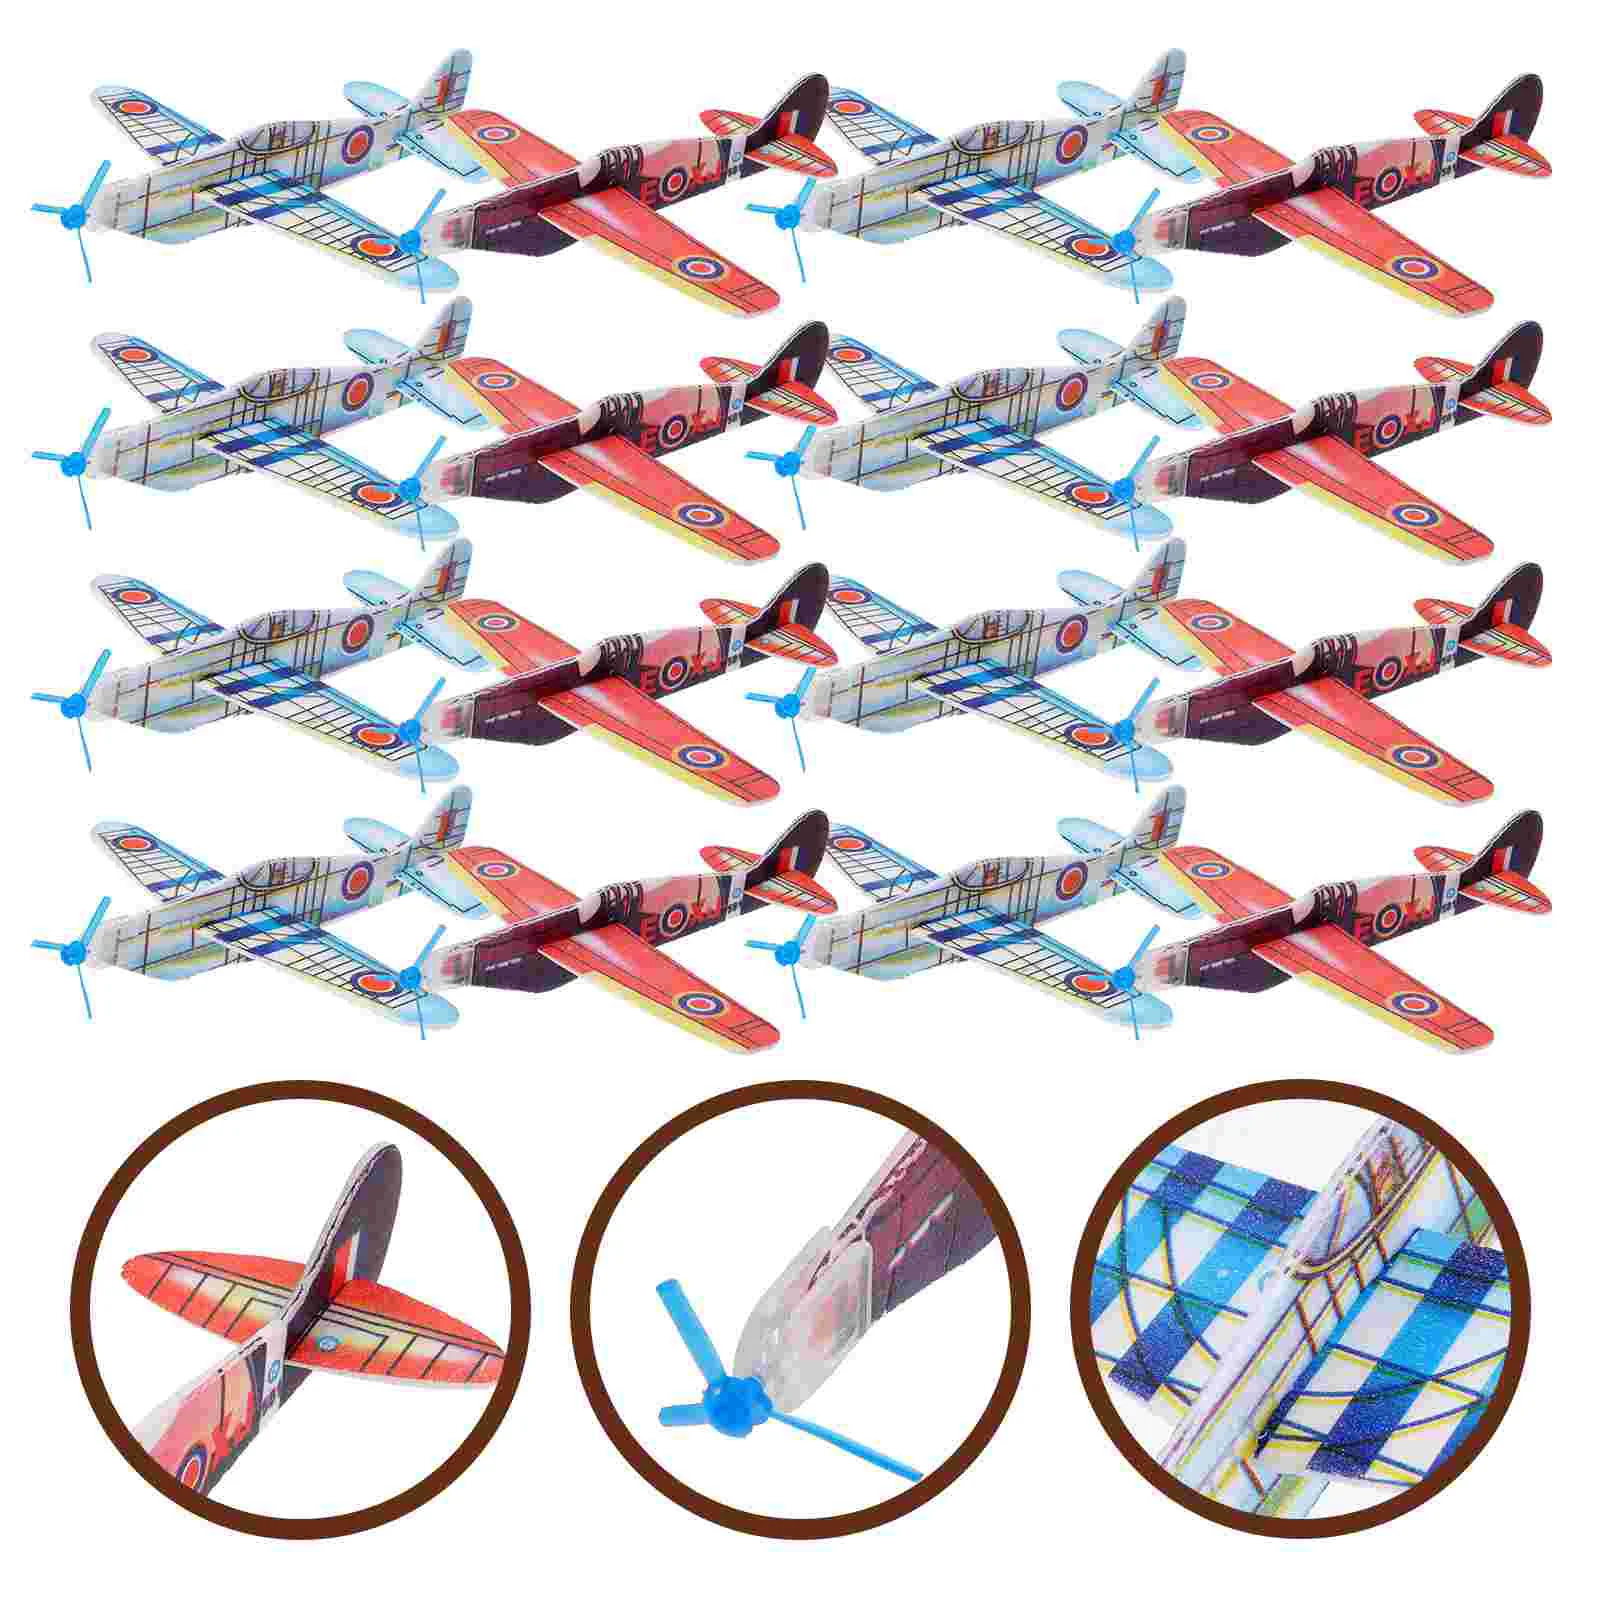 

36 Pcs Hand Throwing Foam Plane Portable Glider Planes Game Kid Toys Foams Creative Funny Airplane Outdoor Kids Children